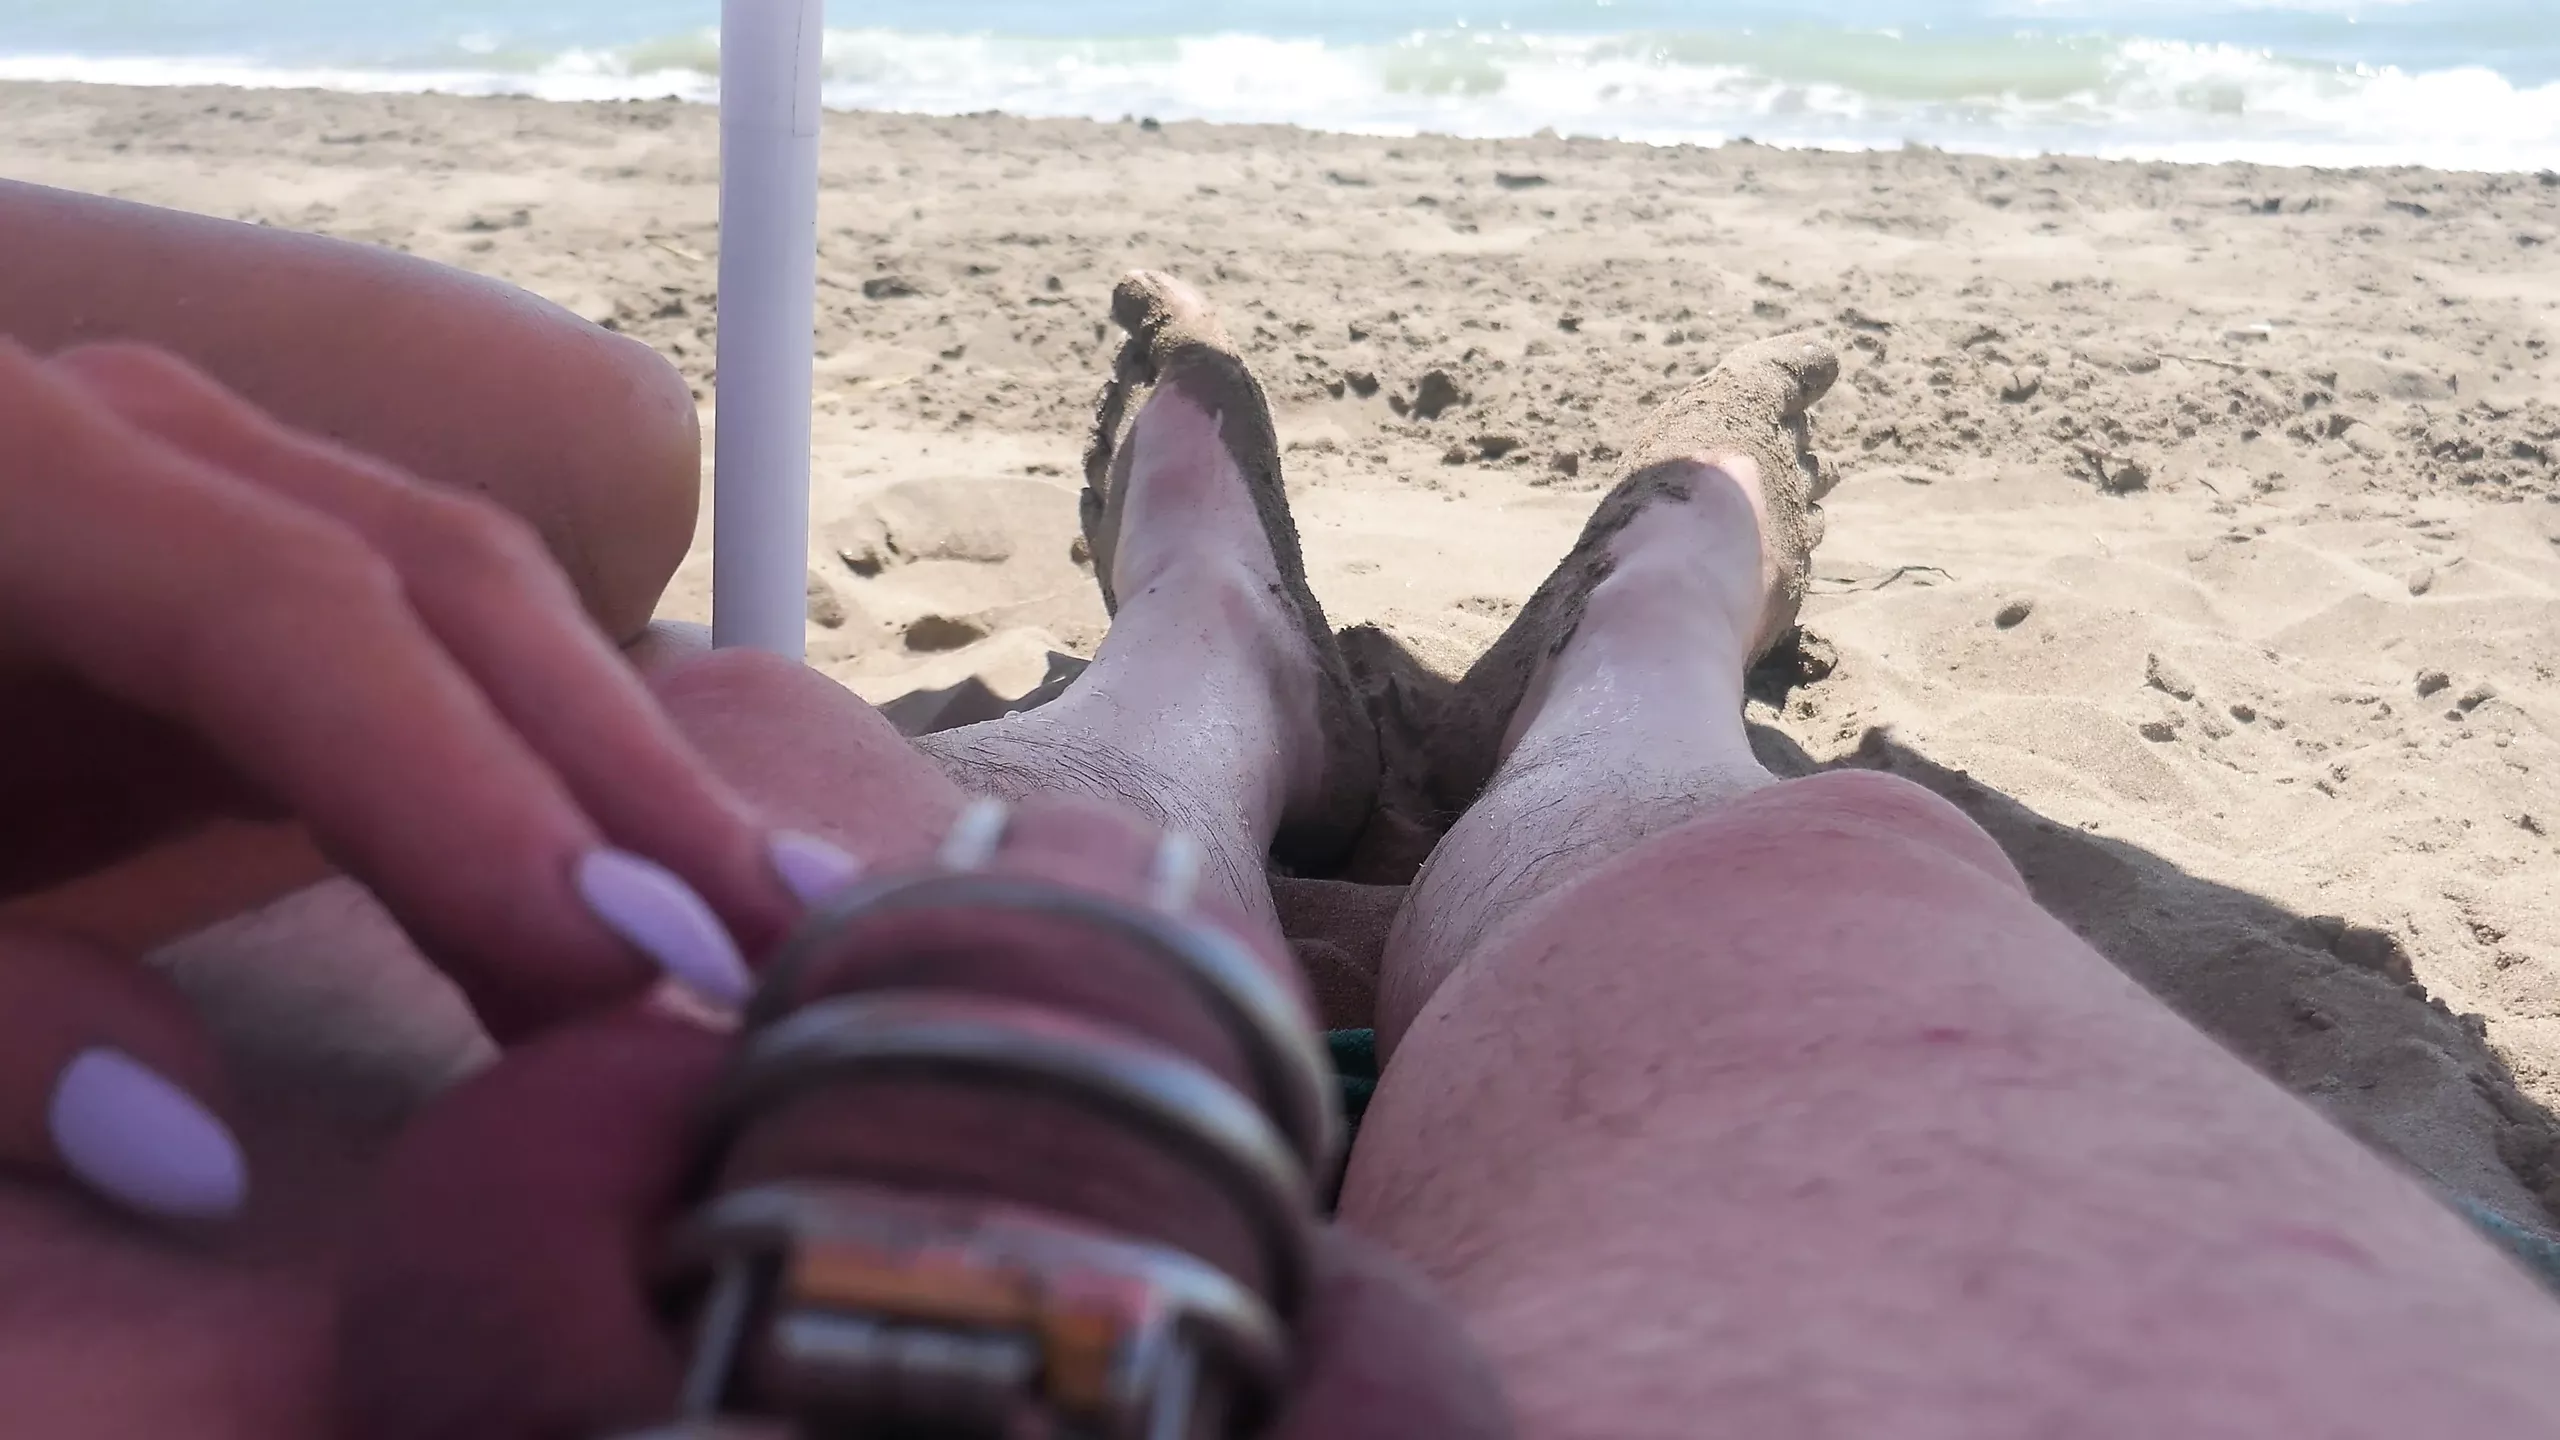 teasing in chastity on the beach picture photo